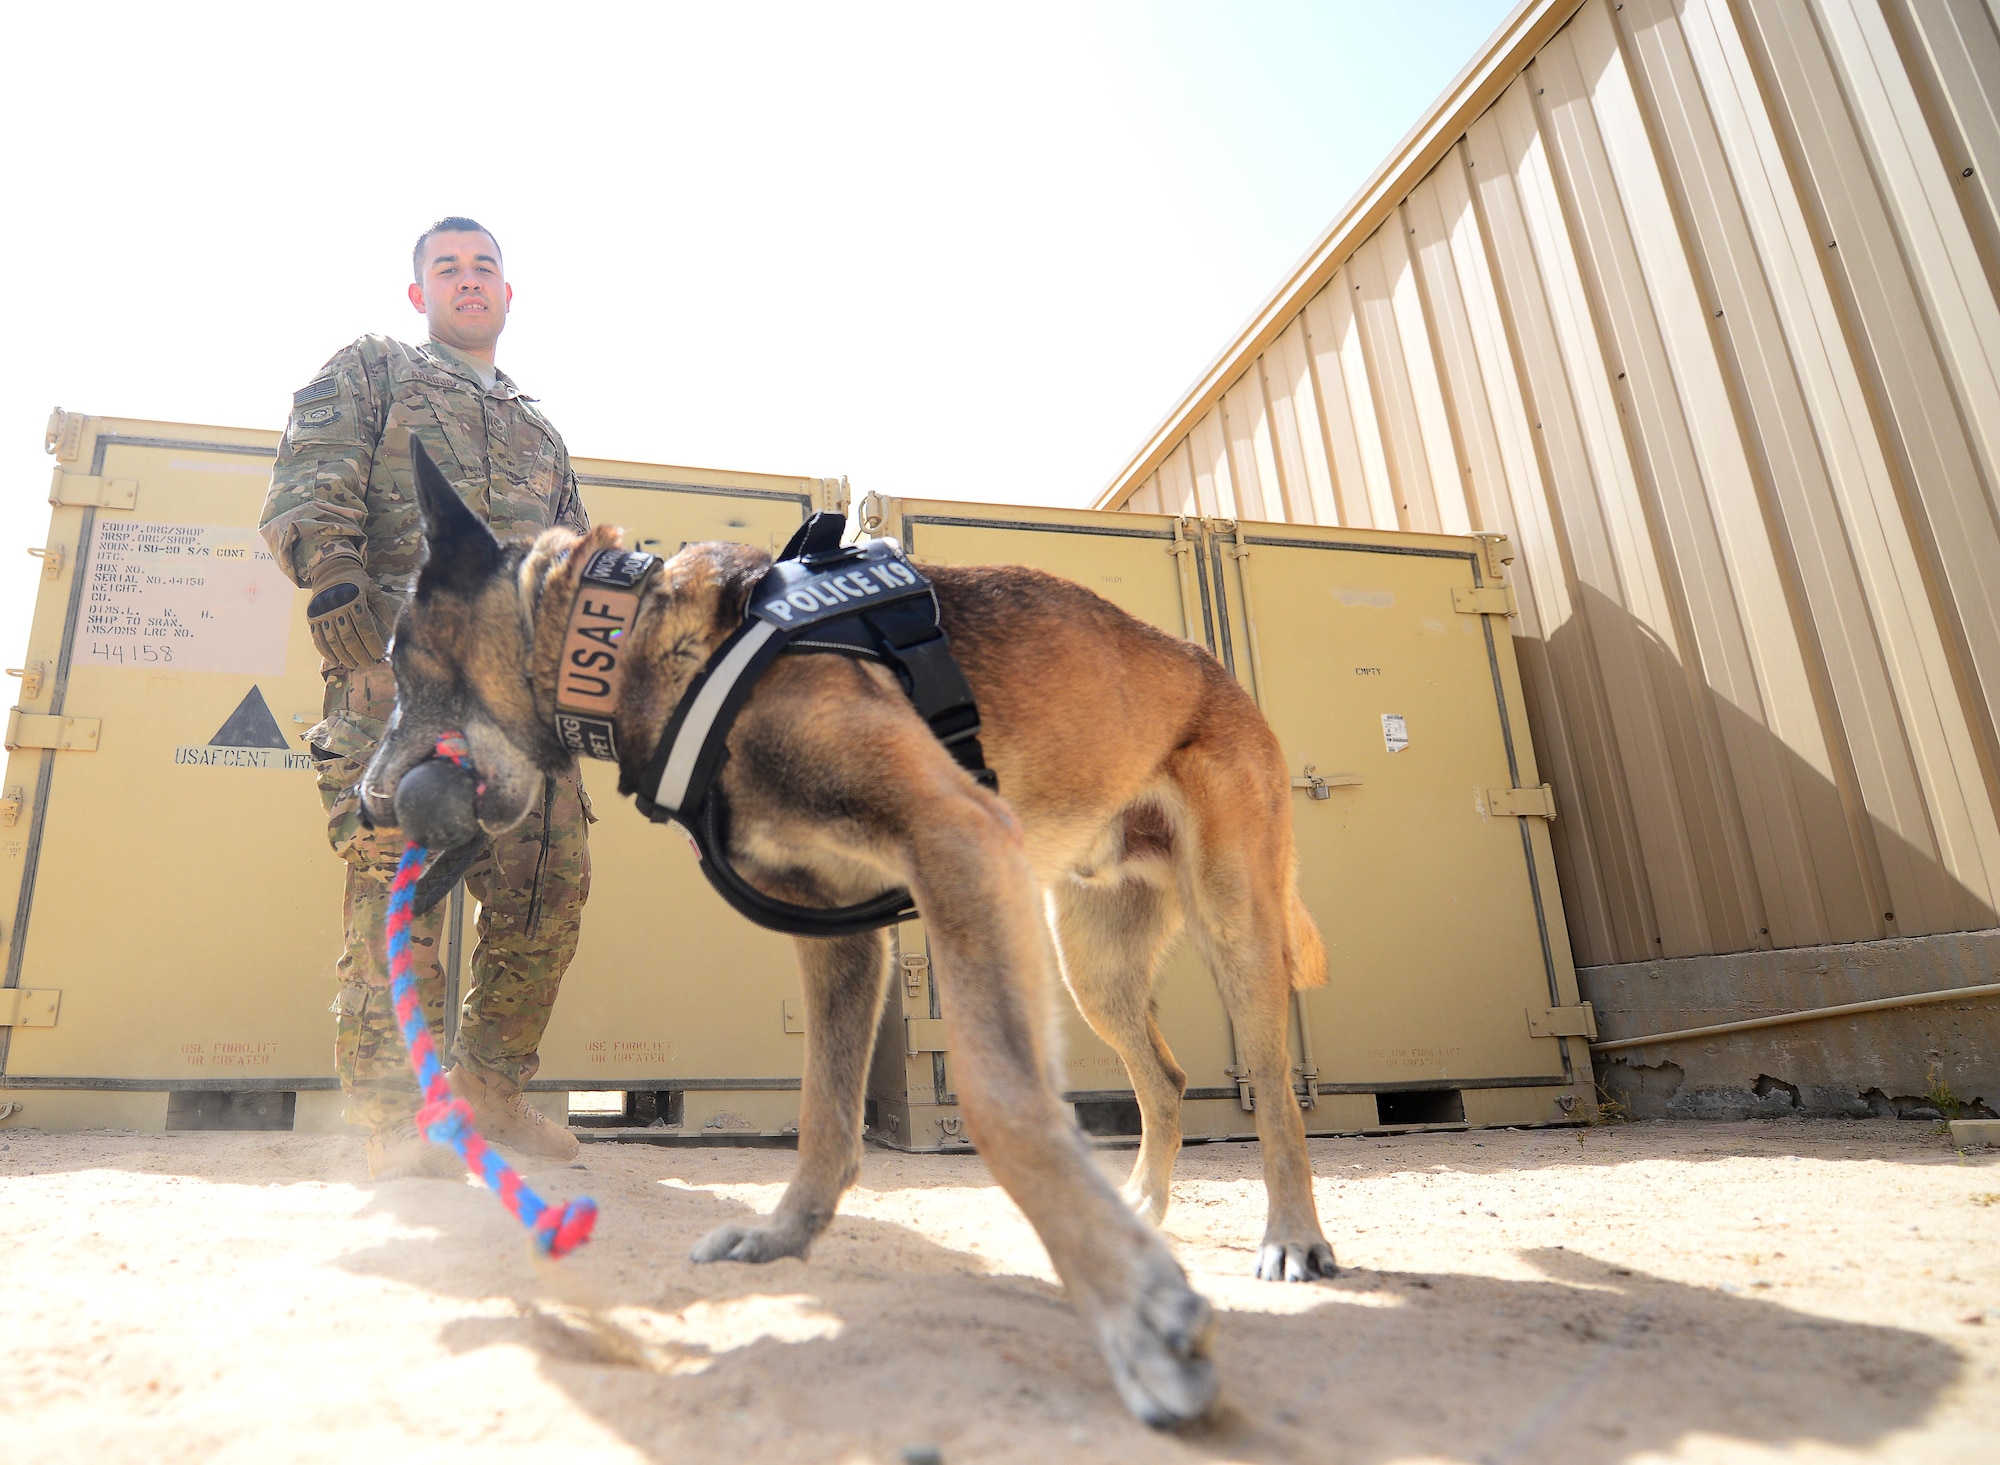 U.S. Air Force Senior Airman Omar Araujo, a military working dog handler and his partner Syrius a military working dog assigned to the 407th Expeditionary Security Forces Squadron play fetch during some down time in Southwest Asia on May 23, 2017. Araujo and Syrius have been partners for about a year now and are deployed in support of Operation Inherent Resolve. Military working dogs are the first line of defense when it comes to explosive detection and provide security sweeps throughout the installation. (U.S. Air Force photo by Tech Sgt. Andy M. Kin)